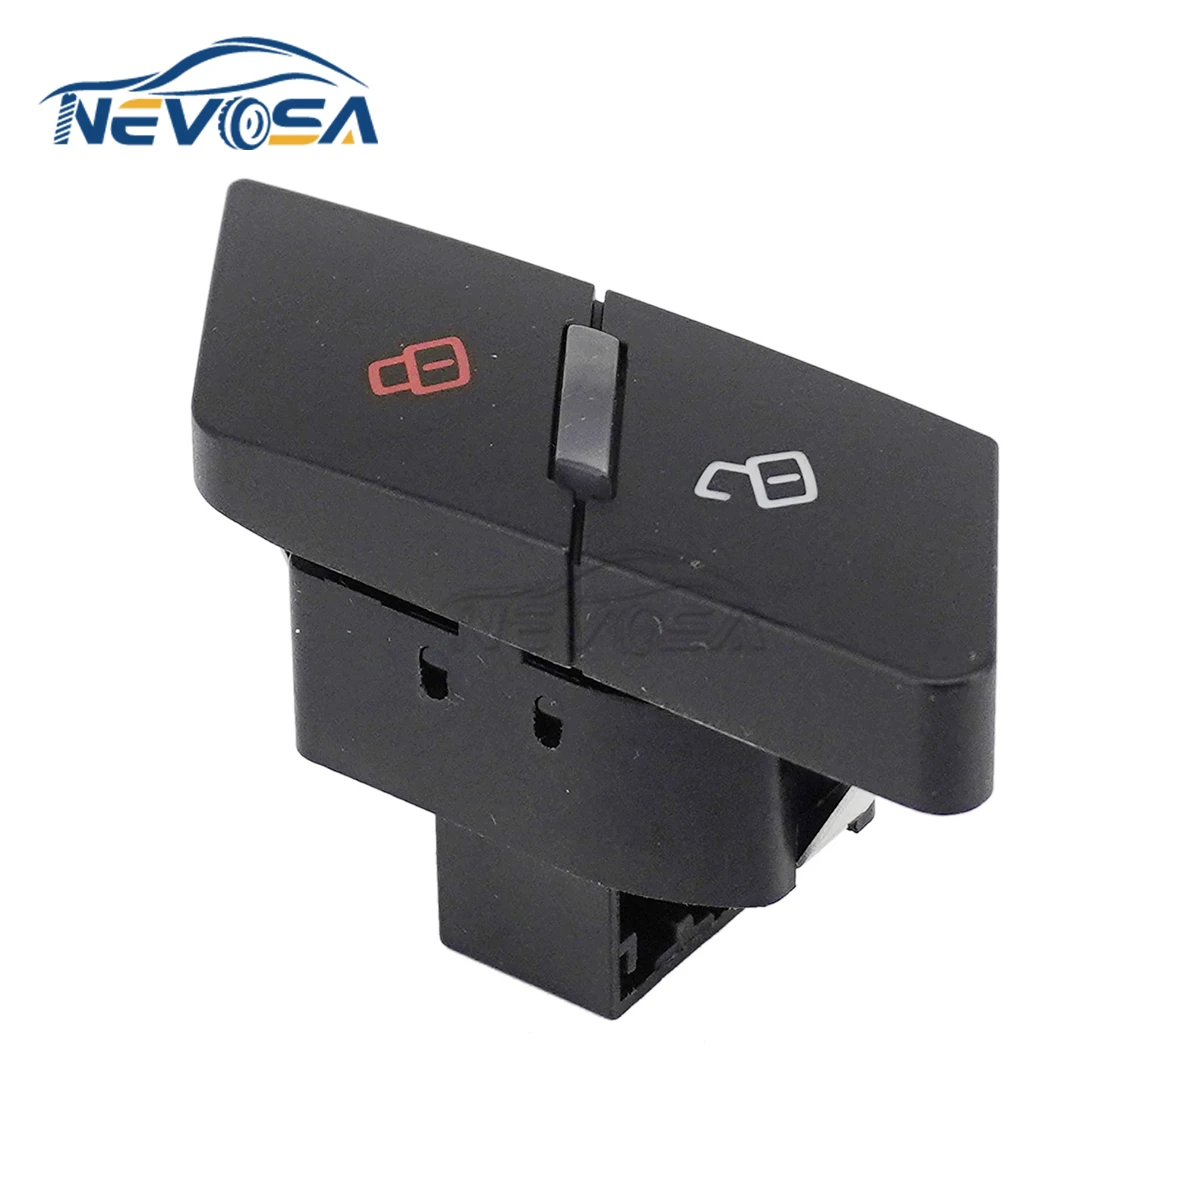 

NOVOSA 4FD962107 For Audi A6 S6 C6 A6 Allroad Quattro 2007-2011 RS6 2008-2011 Left Central Door Locking Switch Button 4Pins